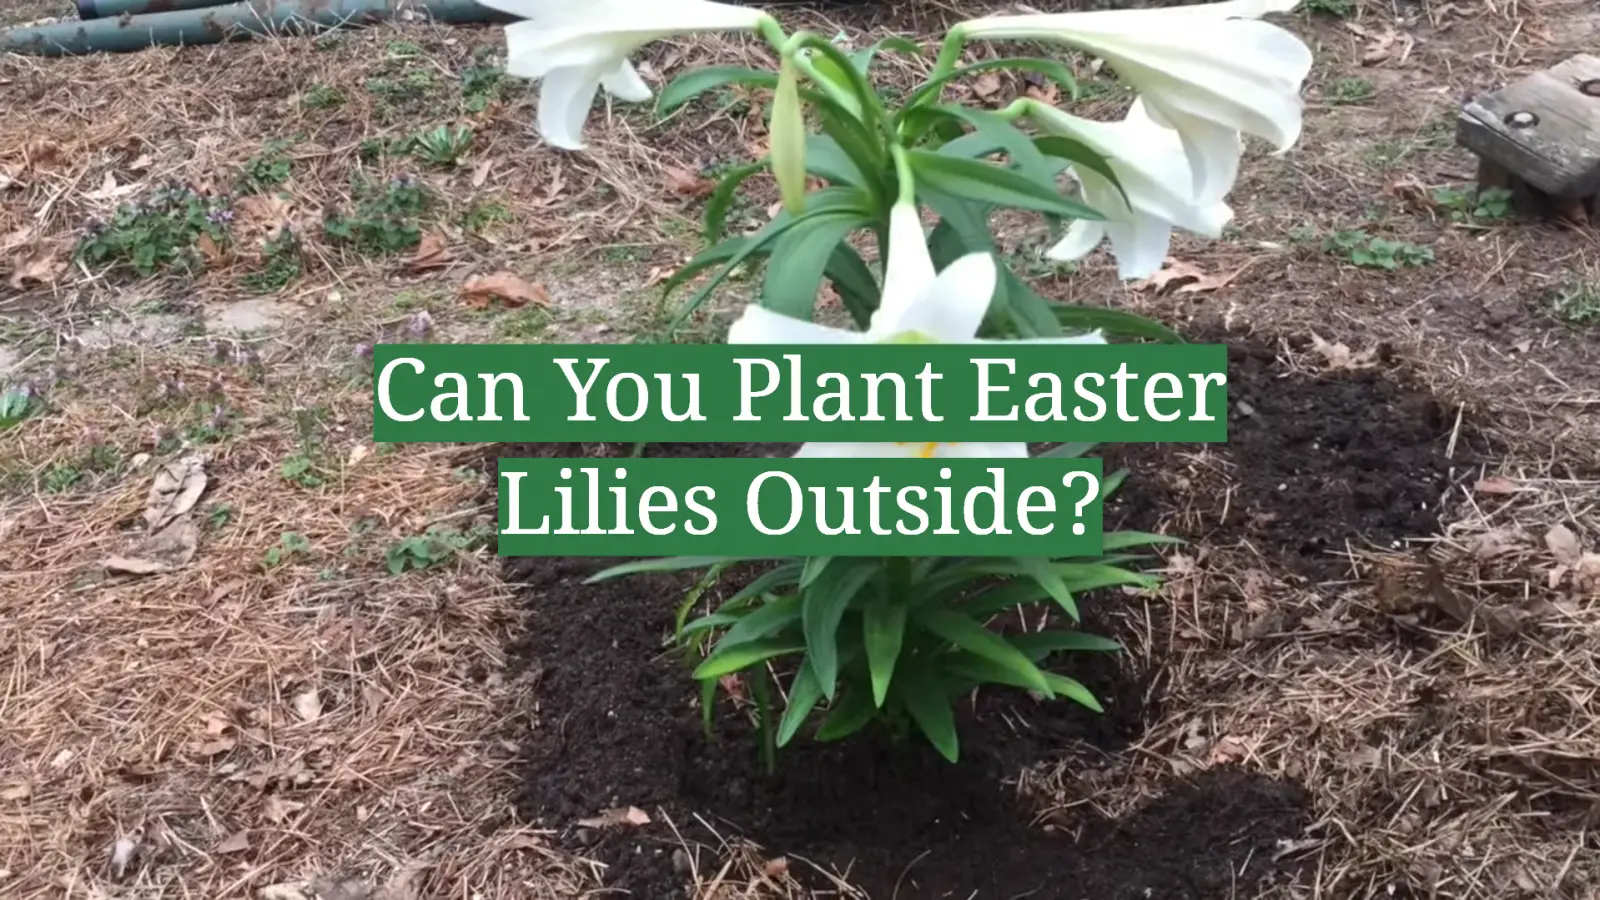 Can You Plant Easter Lilies Outside?